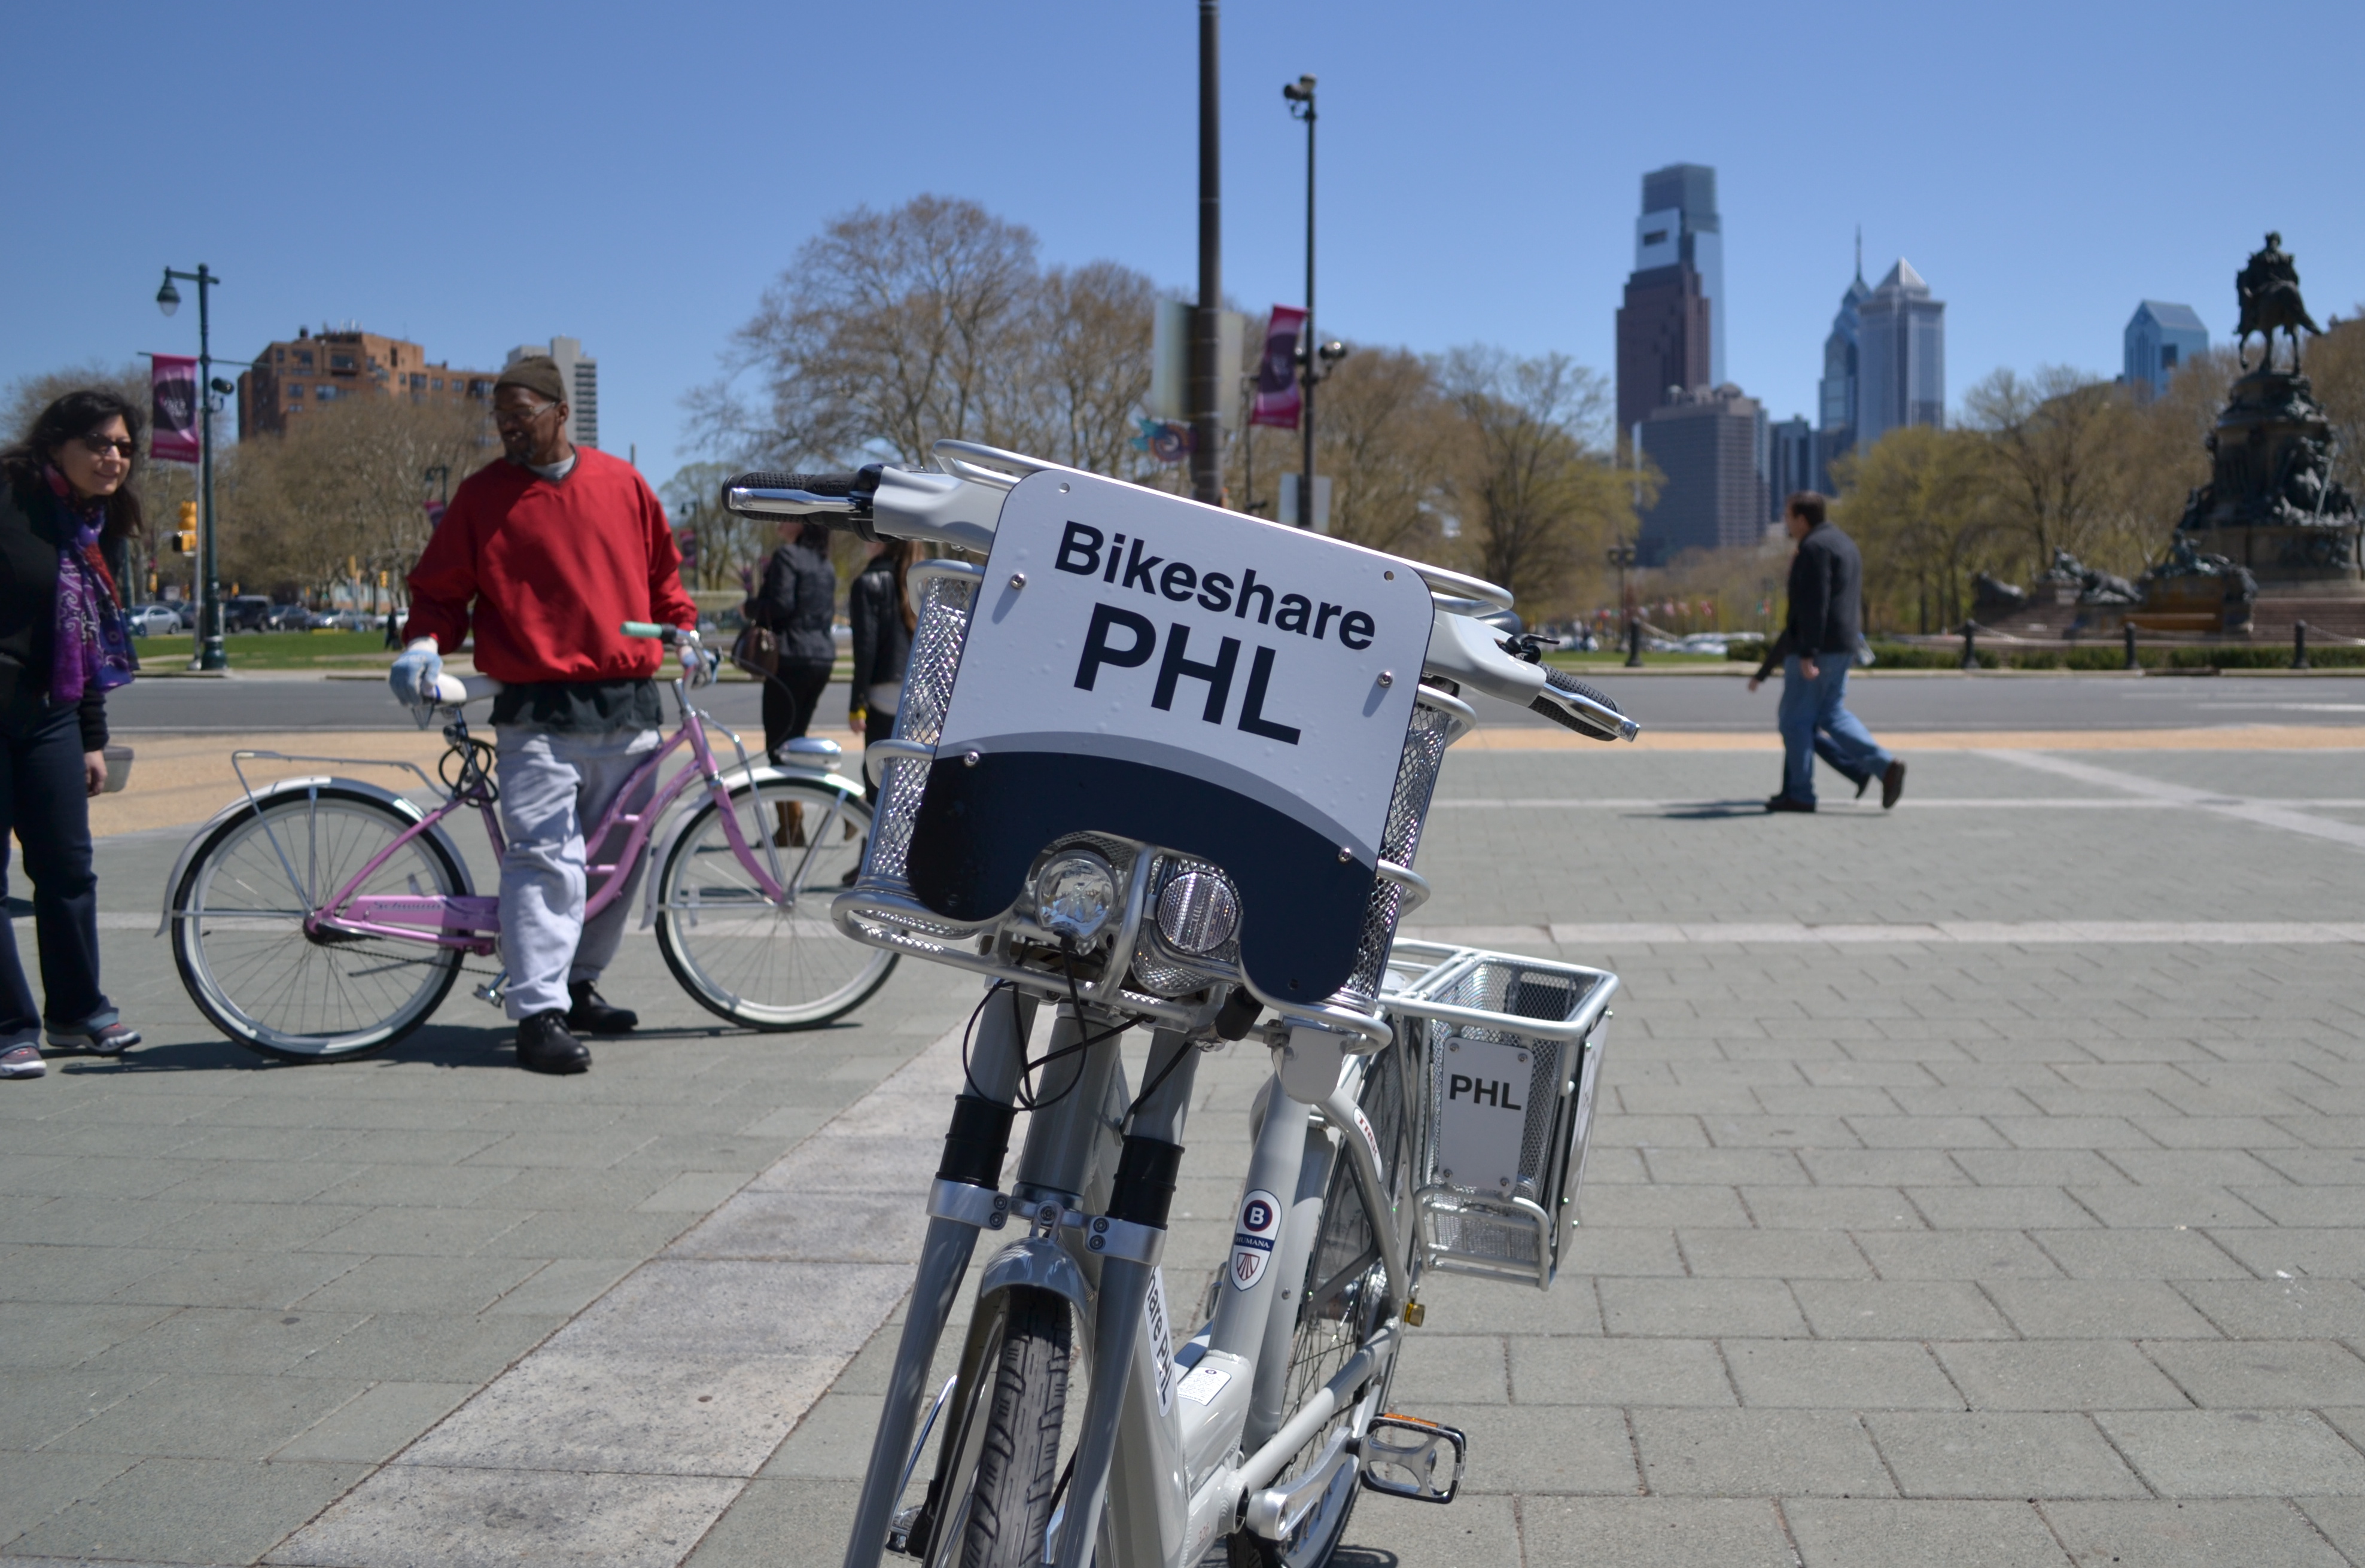 Philly's bike share system is set to roll out in spring 2015